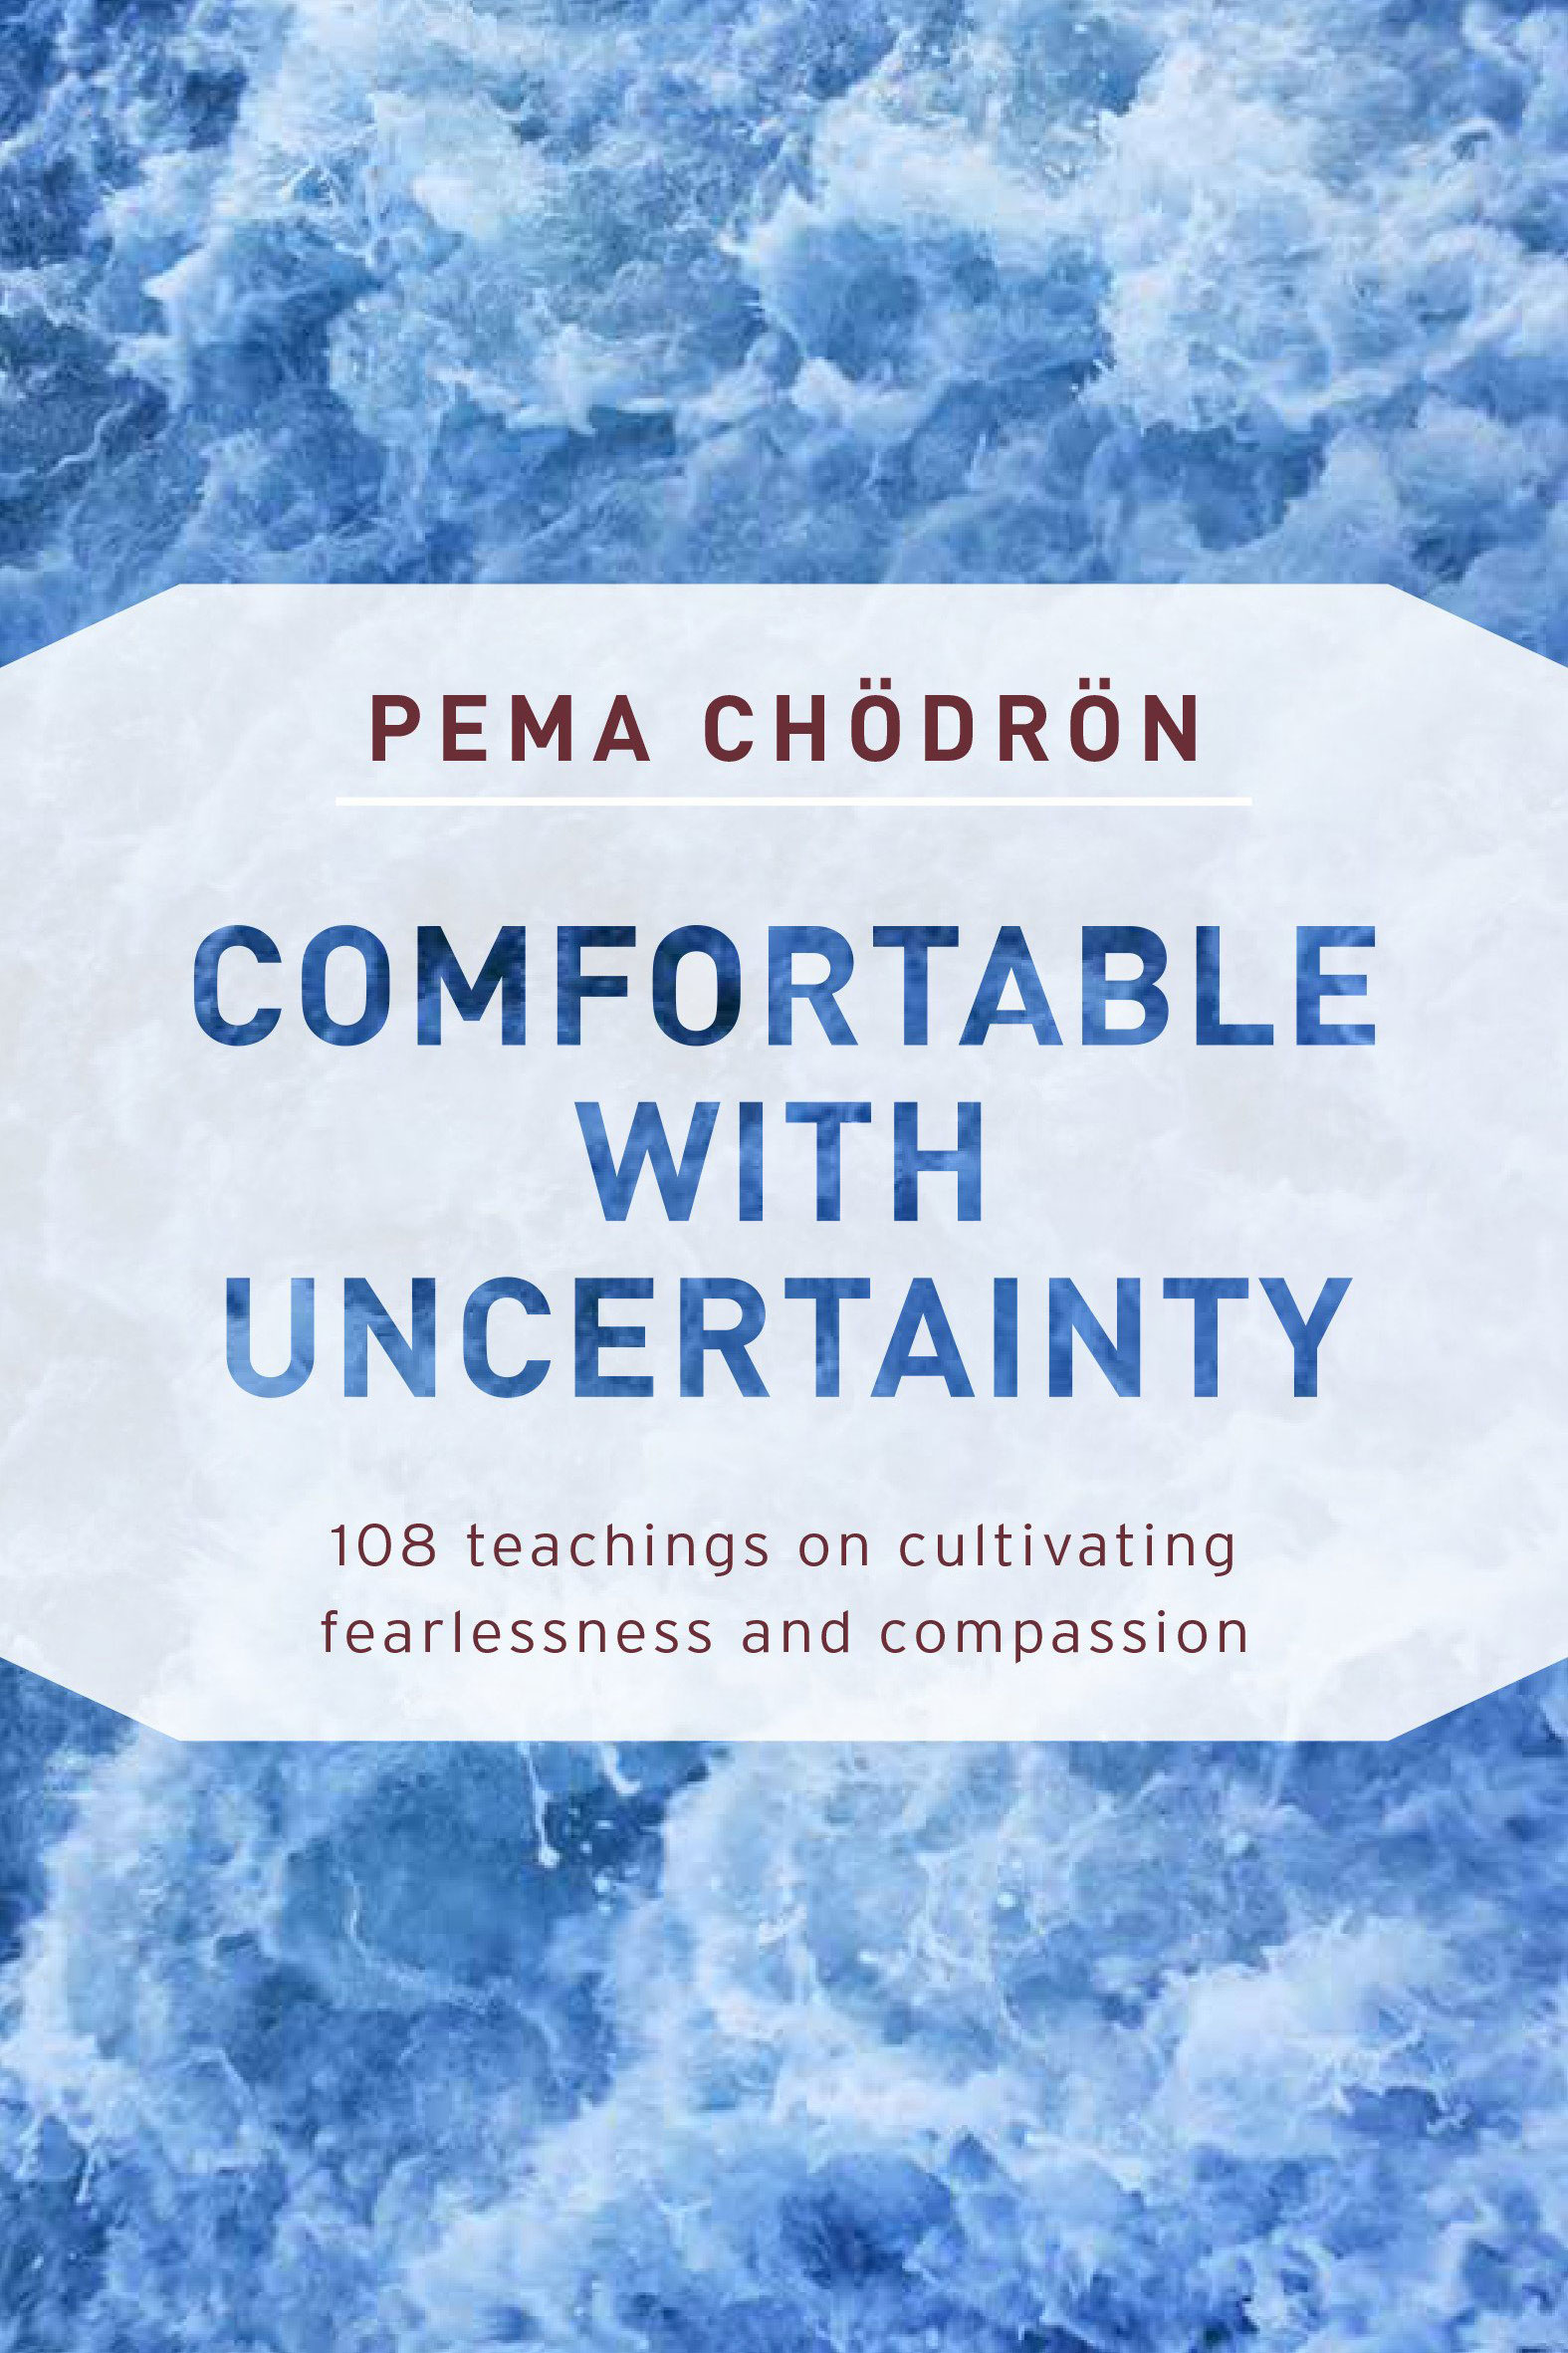 Comfortable with Uncertainty: 108 Teachings on Cultivating Fearlessness and Compassion by Pema Chodron